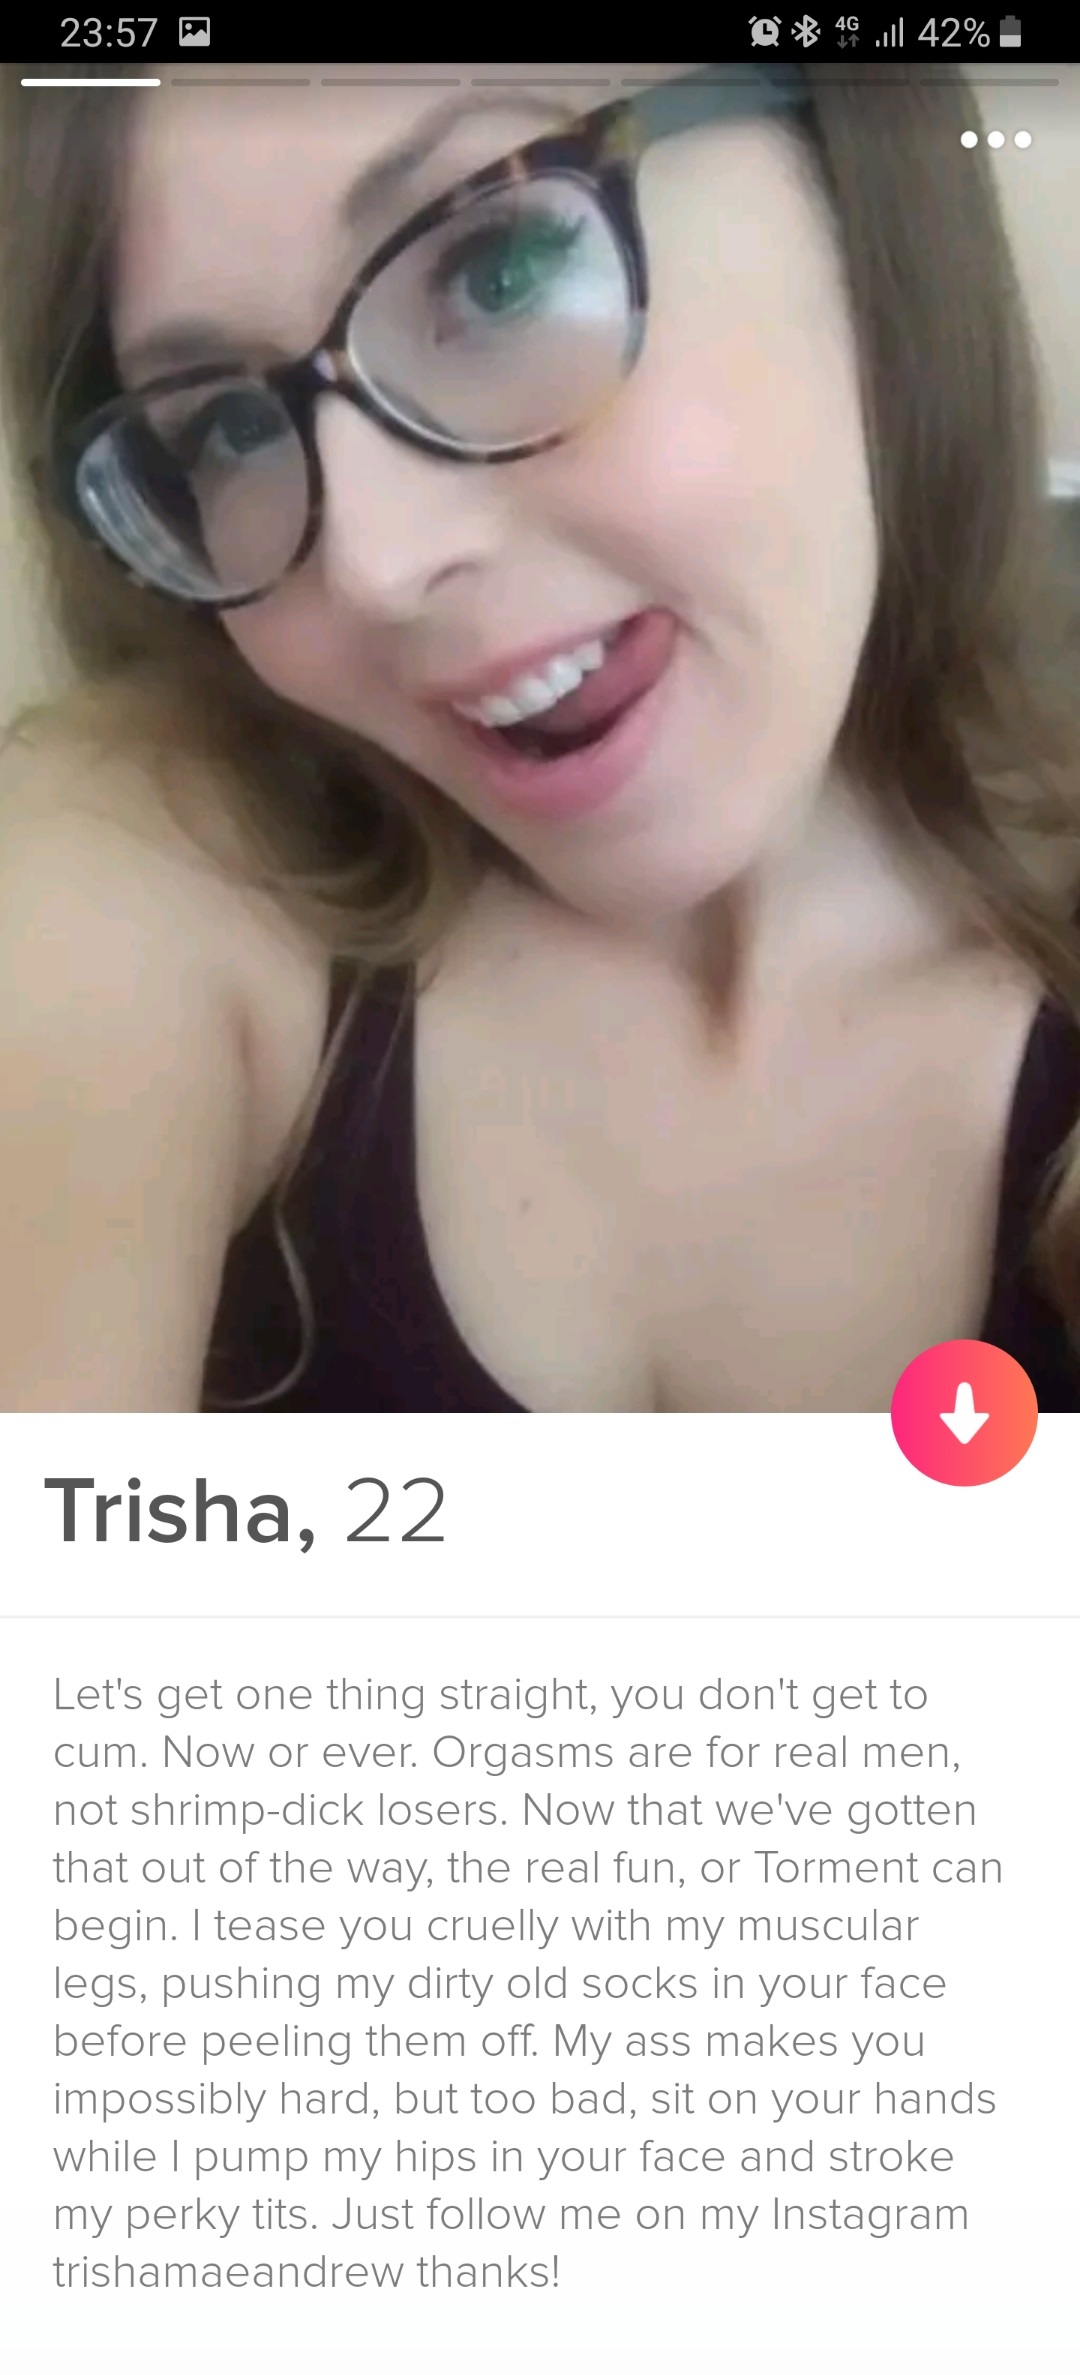 Trisha, 22 Let's get one thing straight, you don't get to cum. Now or ever. Orgasms are for real men, not shrimpdick losers. Now that we've gotten that out of the way, the real fun, or Torment can begin. I tease you cruelly with my muscular…